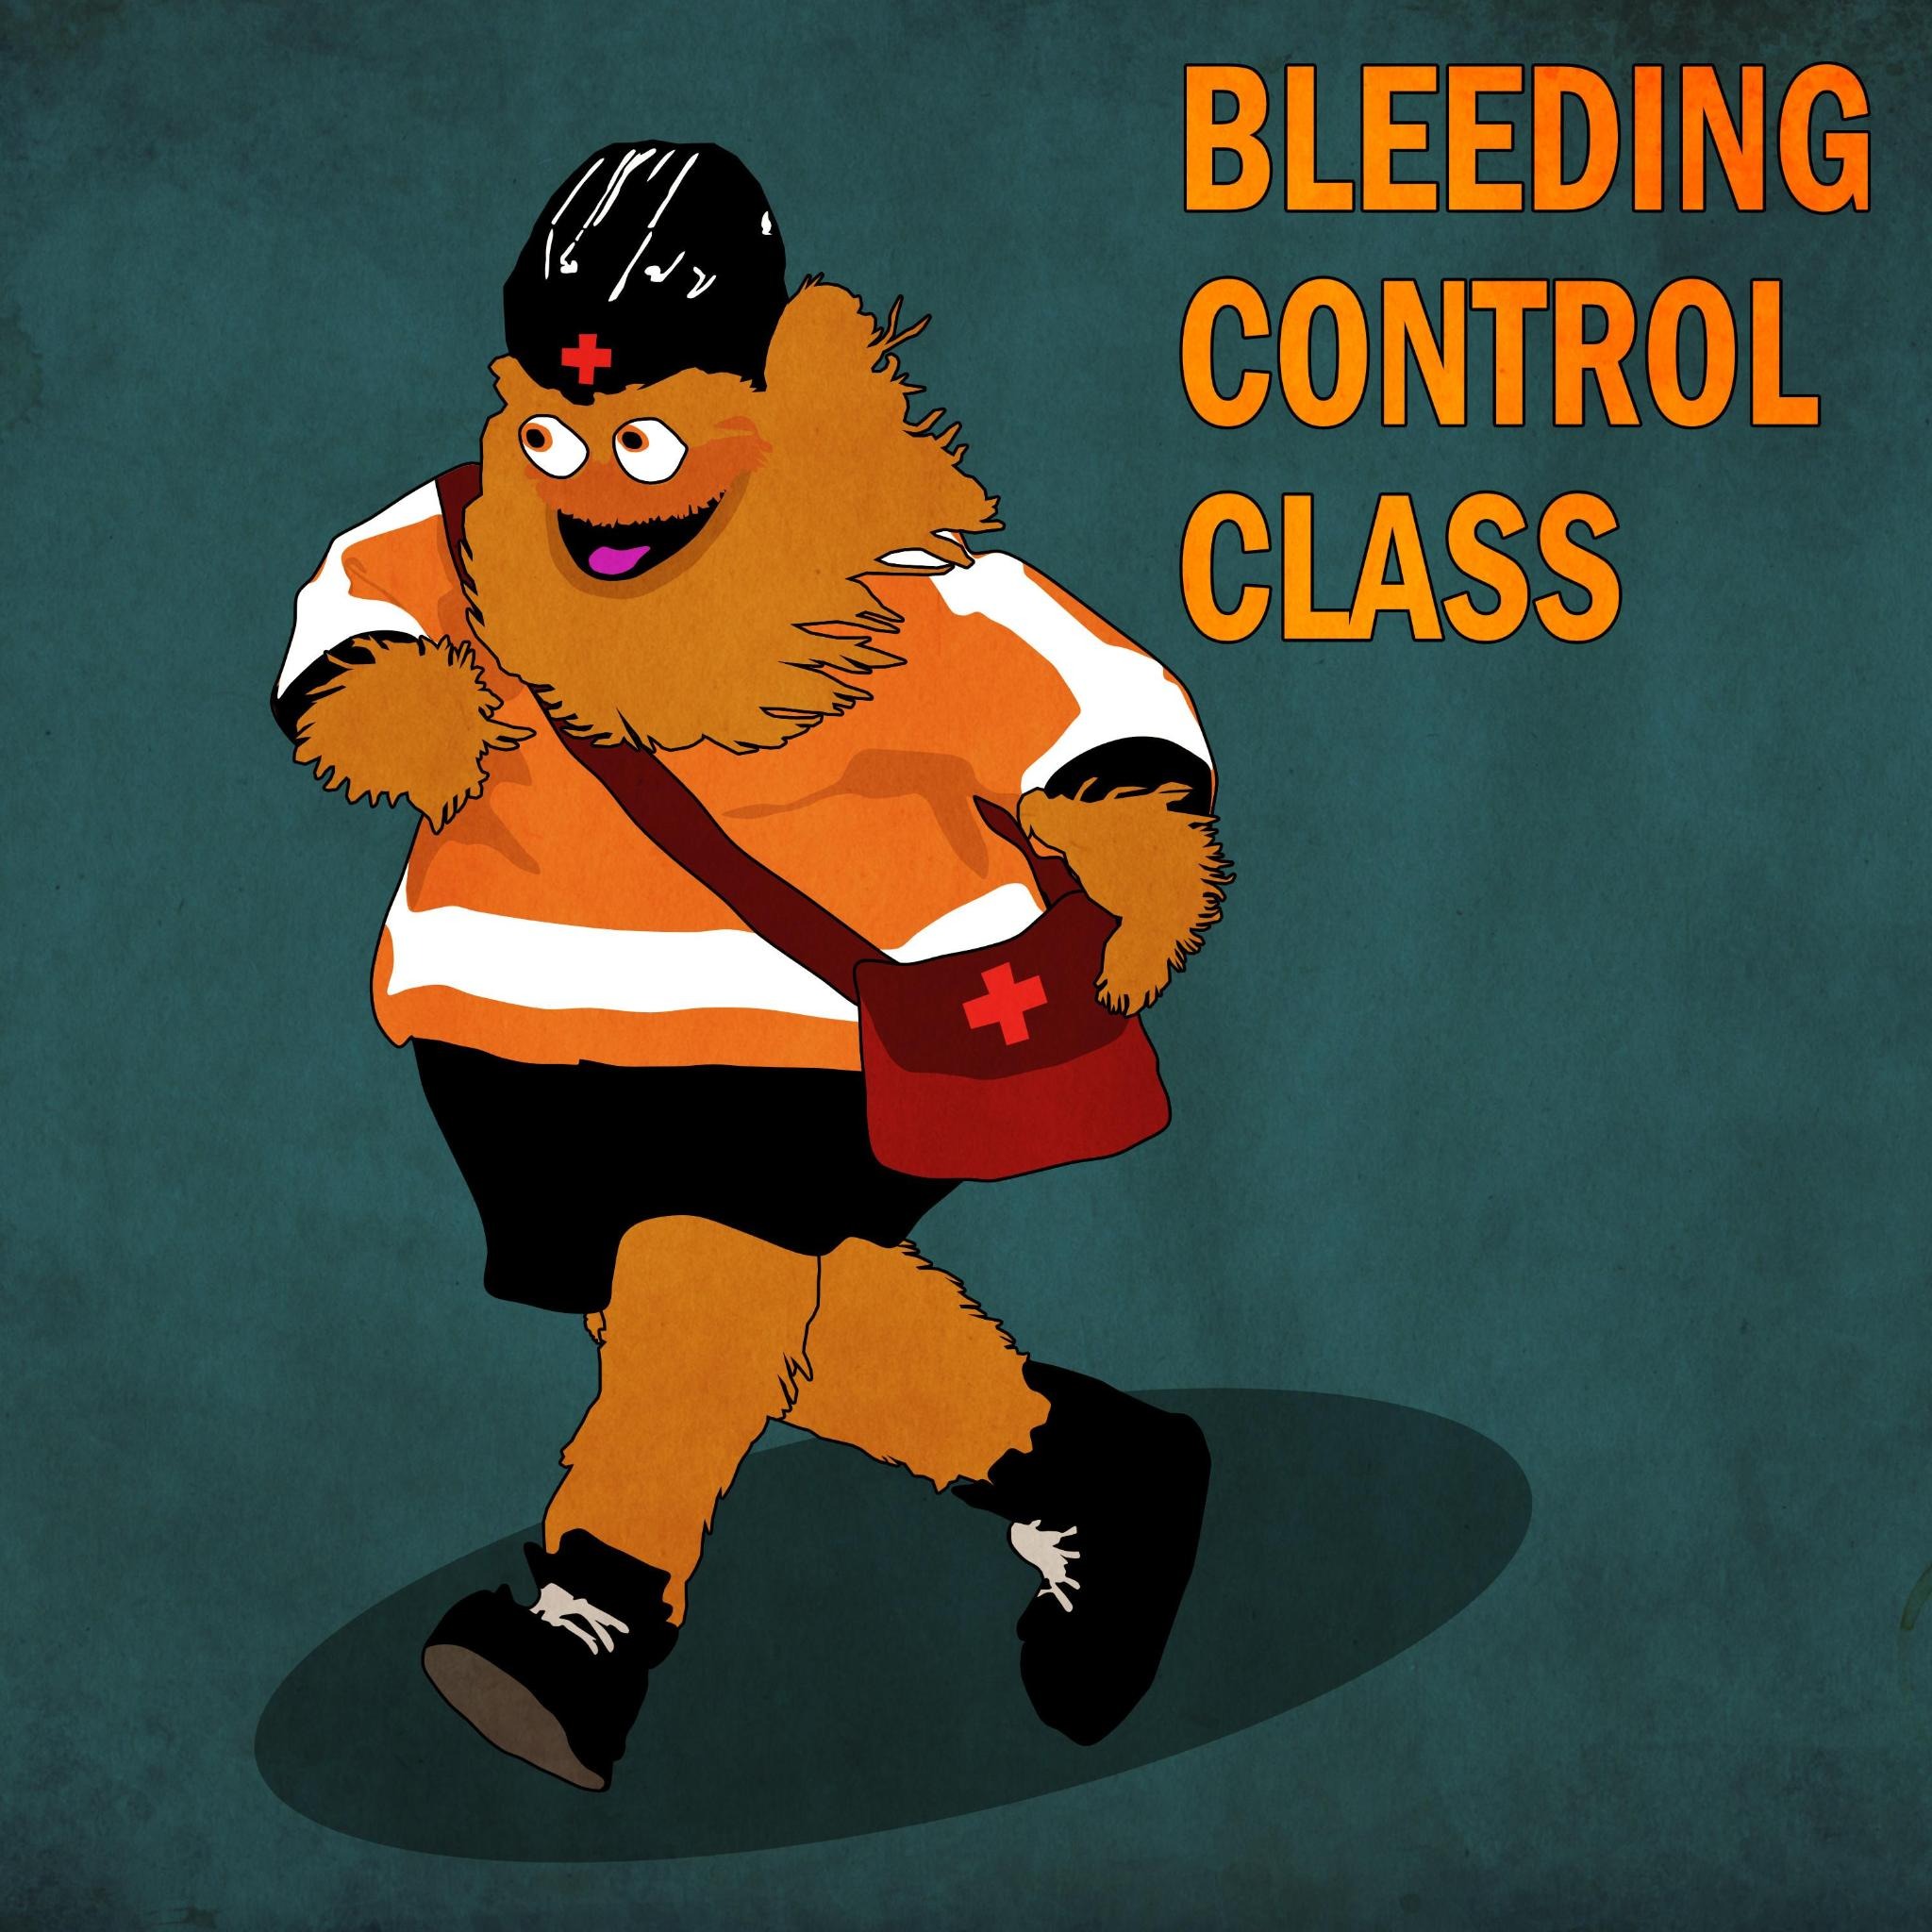 Gritty (hairy orange mascot of the Flyers) in stride, wearing a hockey helmet with a red cross and carrying a bag with a red cross. Orange text in the top right corner says "BLEEDING CONTROL CLASS."